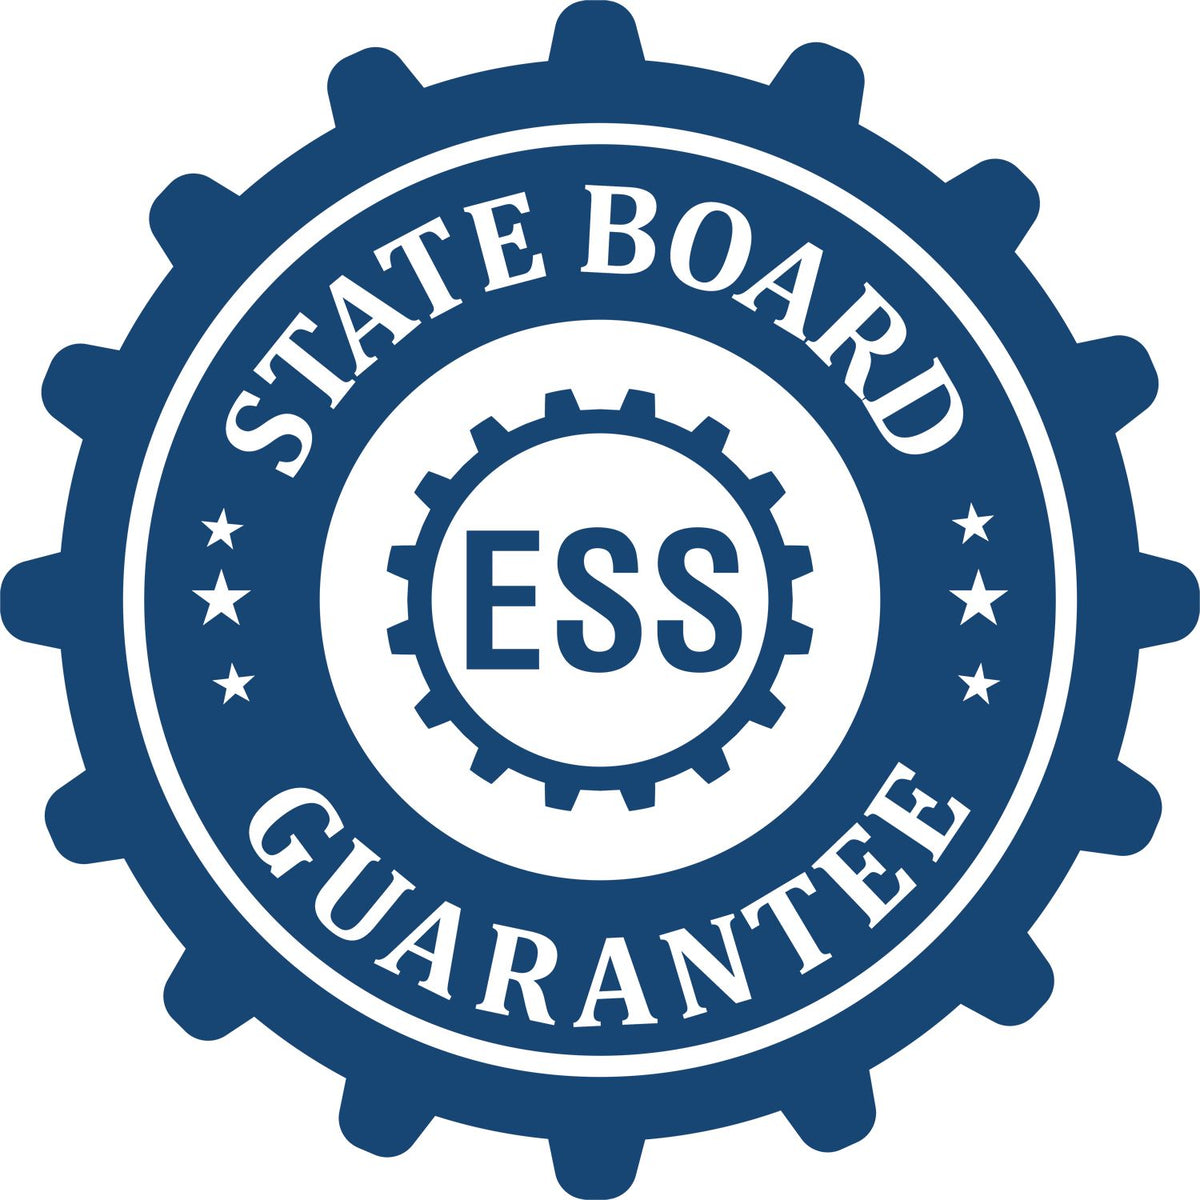 An emblem in a gear shape illustrating a state board guarantee for the Premium MaxLight Pre-Inked Louisiana Engineering Stamp product.